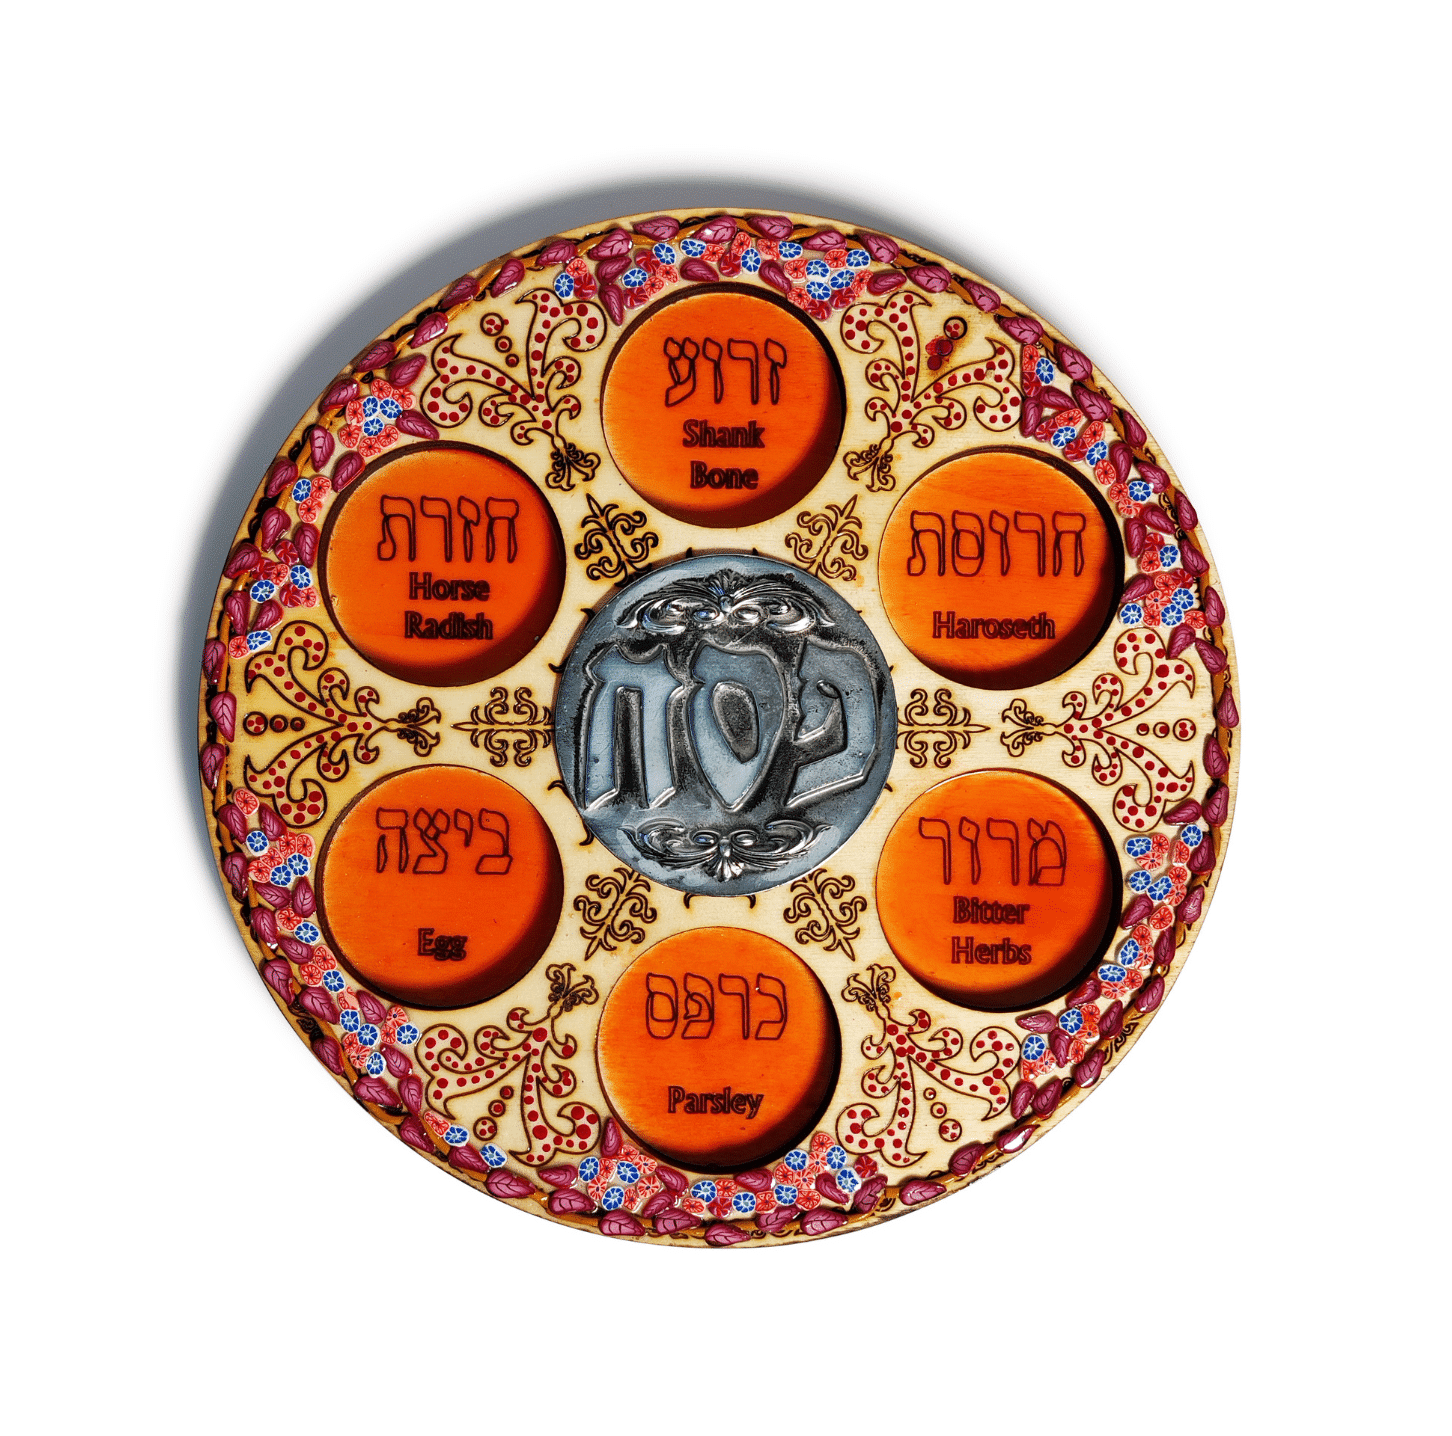 Wood & Clay Purple Ornate Passover Seder Plate